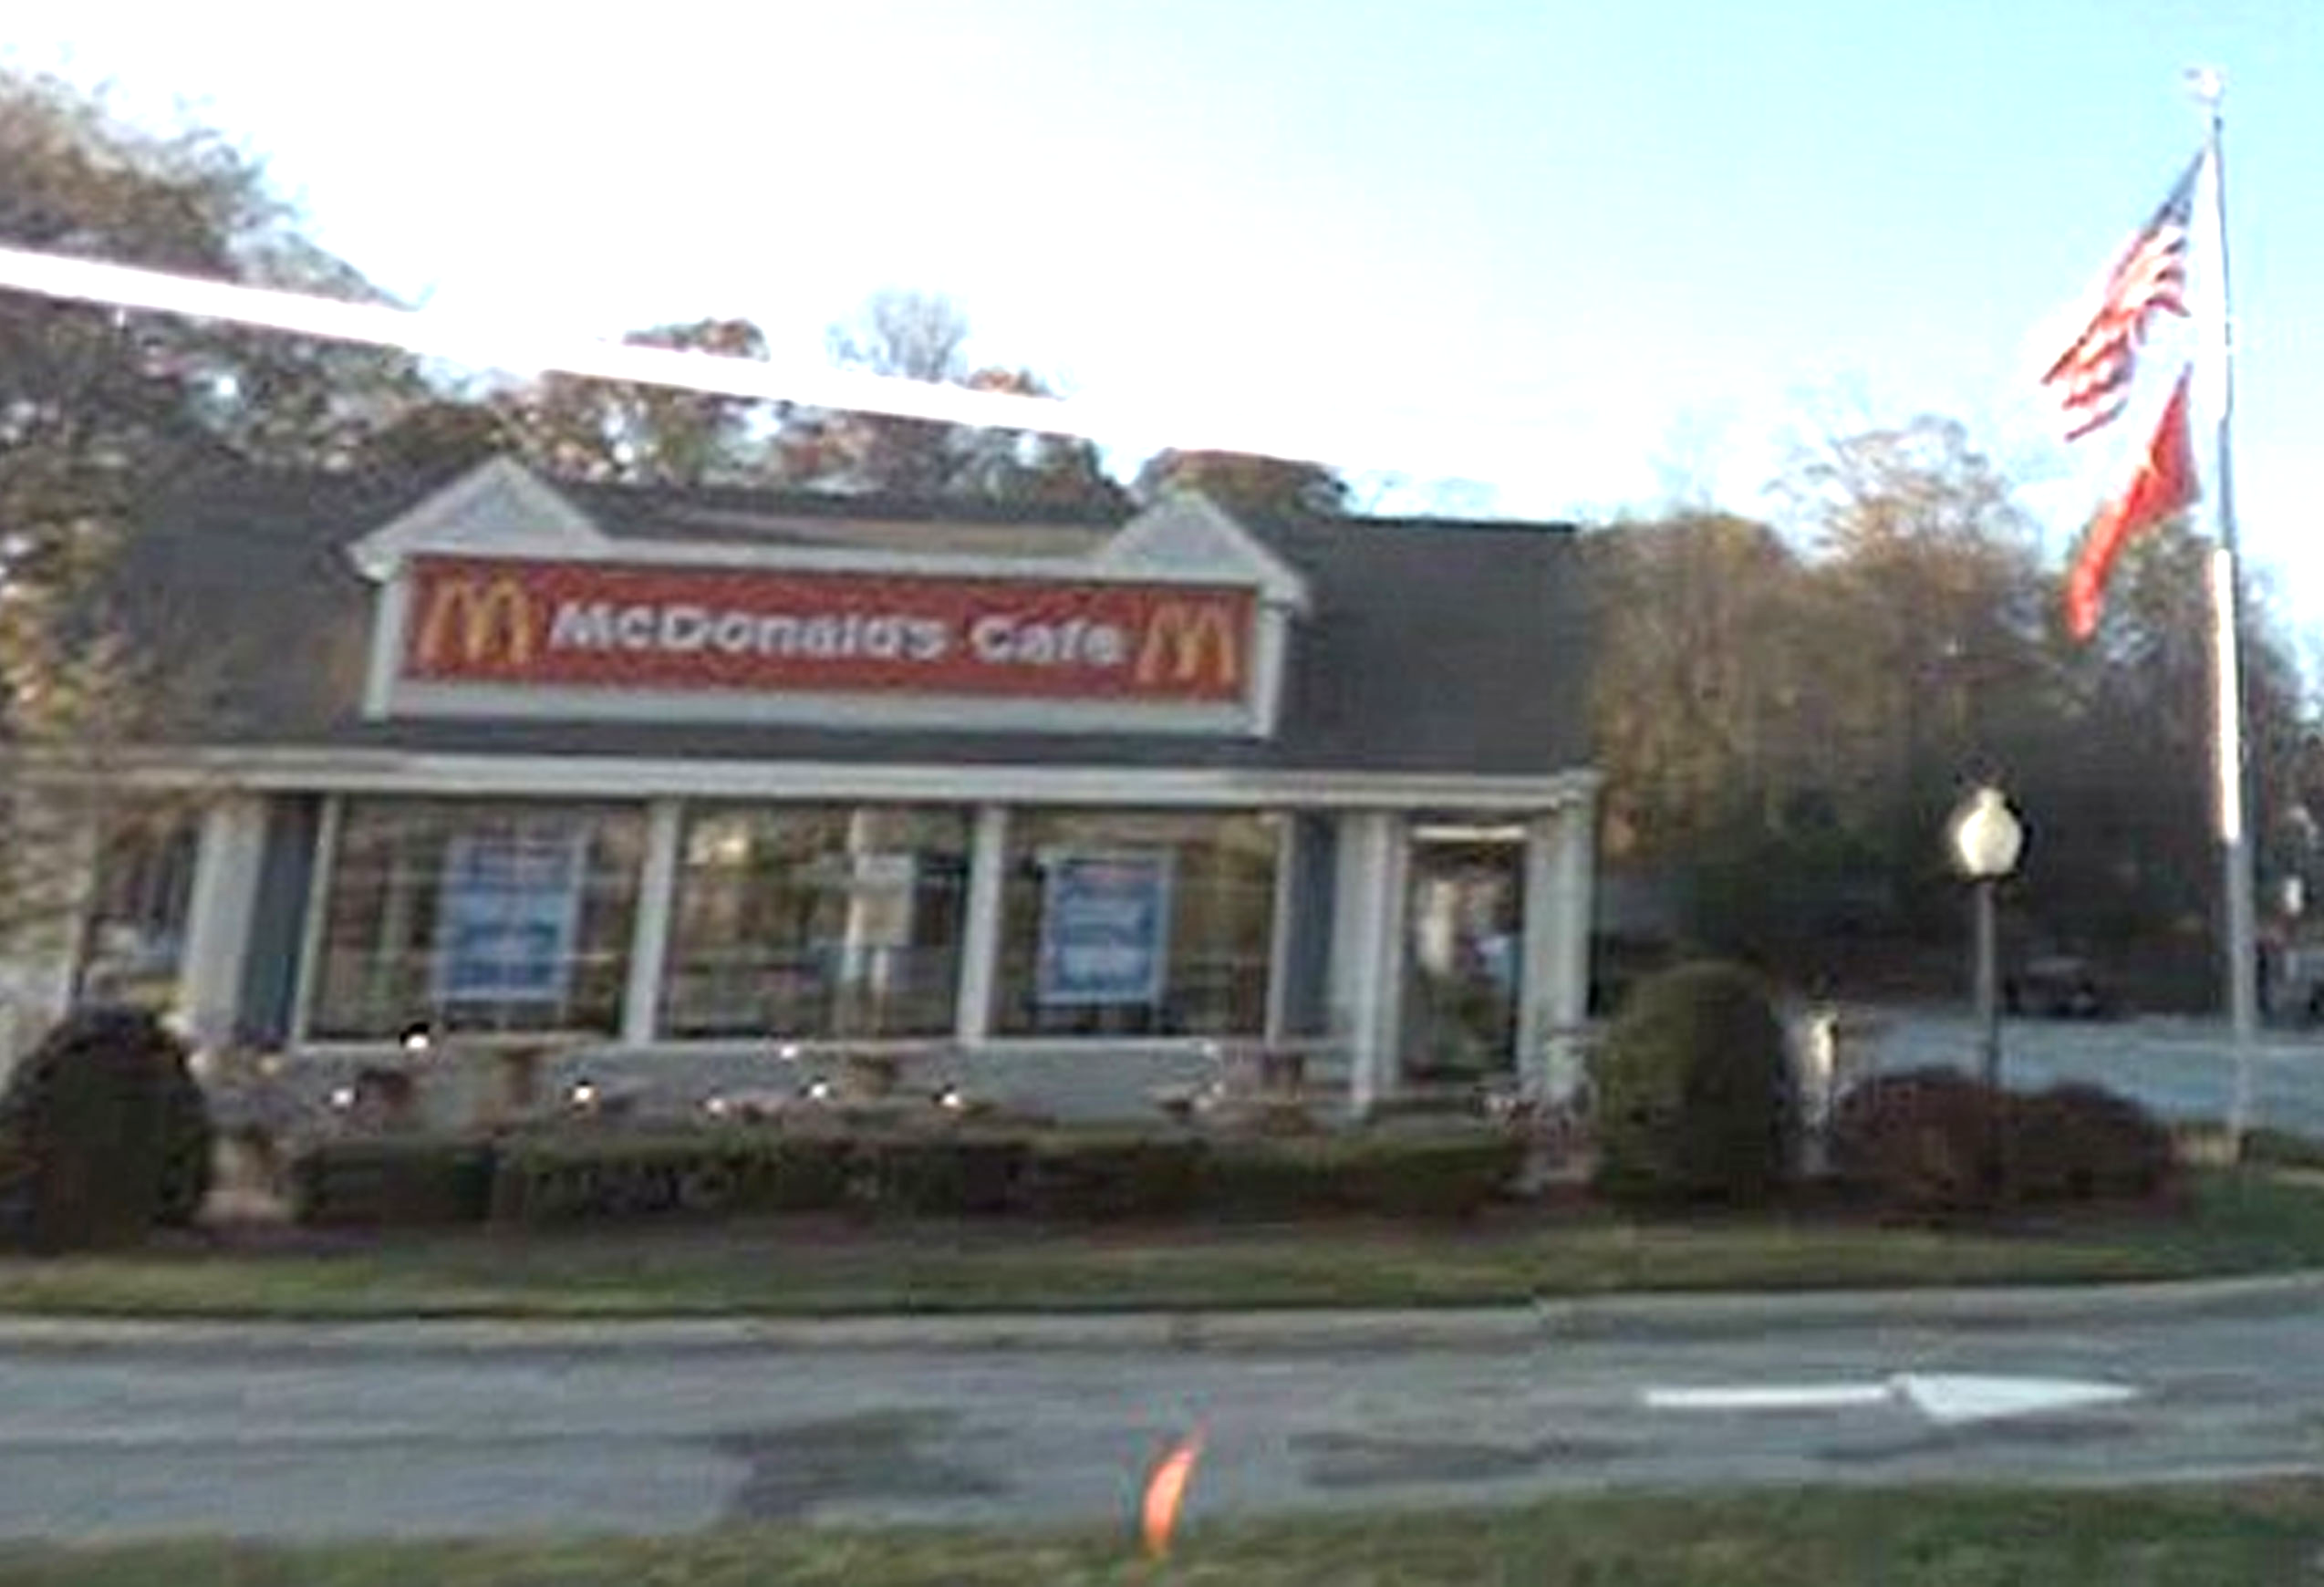 This McDonald's restaurant in Winchedon, Massachusetts is requesting only university graduates apply for the role of full time cashier